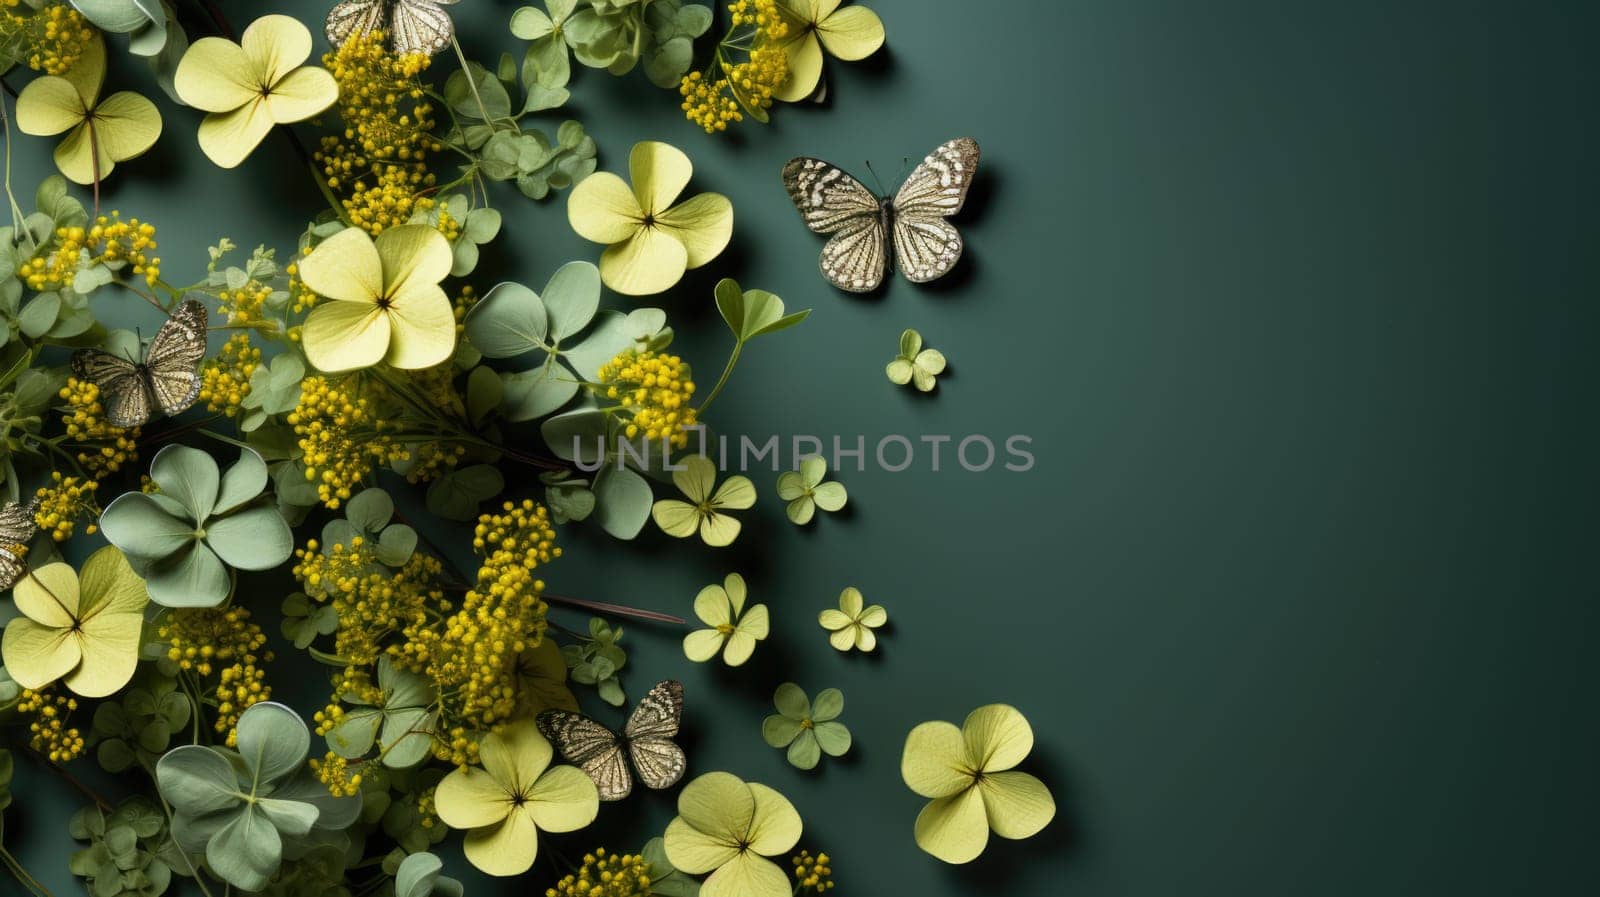 Yellow Flowers and Butterflies on Green Background by but_photo